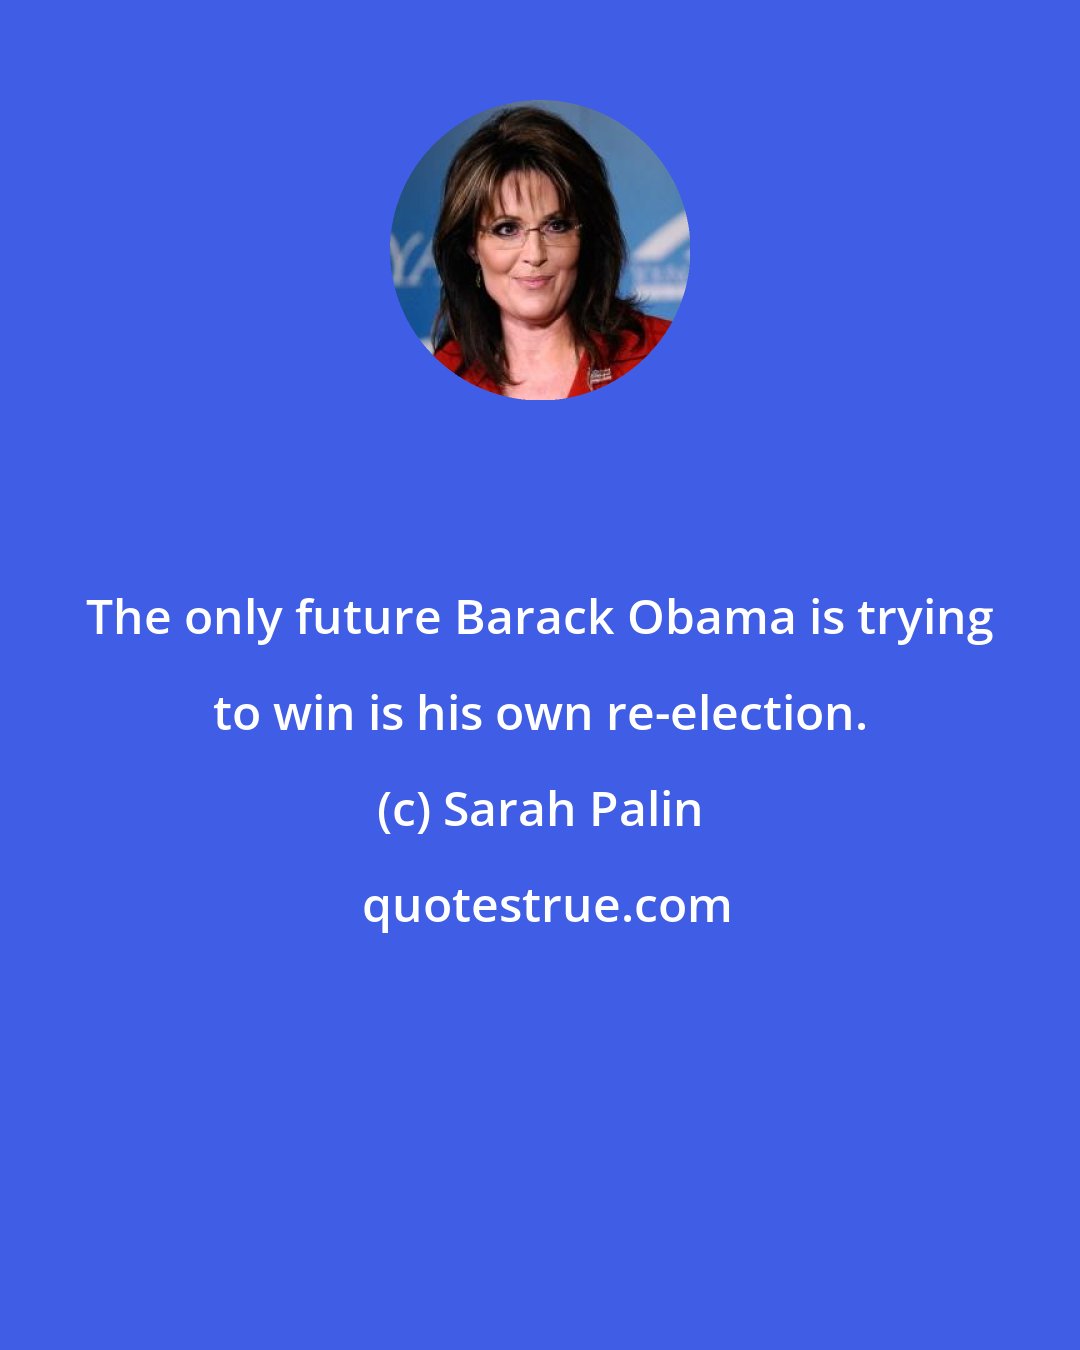 Sarah Palin: The only future Barack Obama is trying to win is his own re-election.